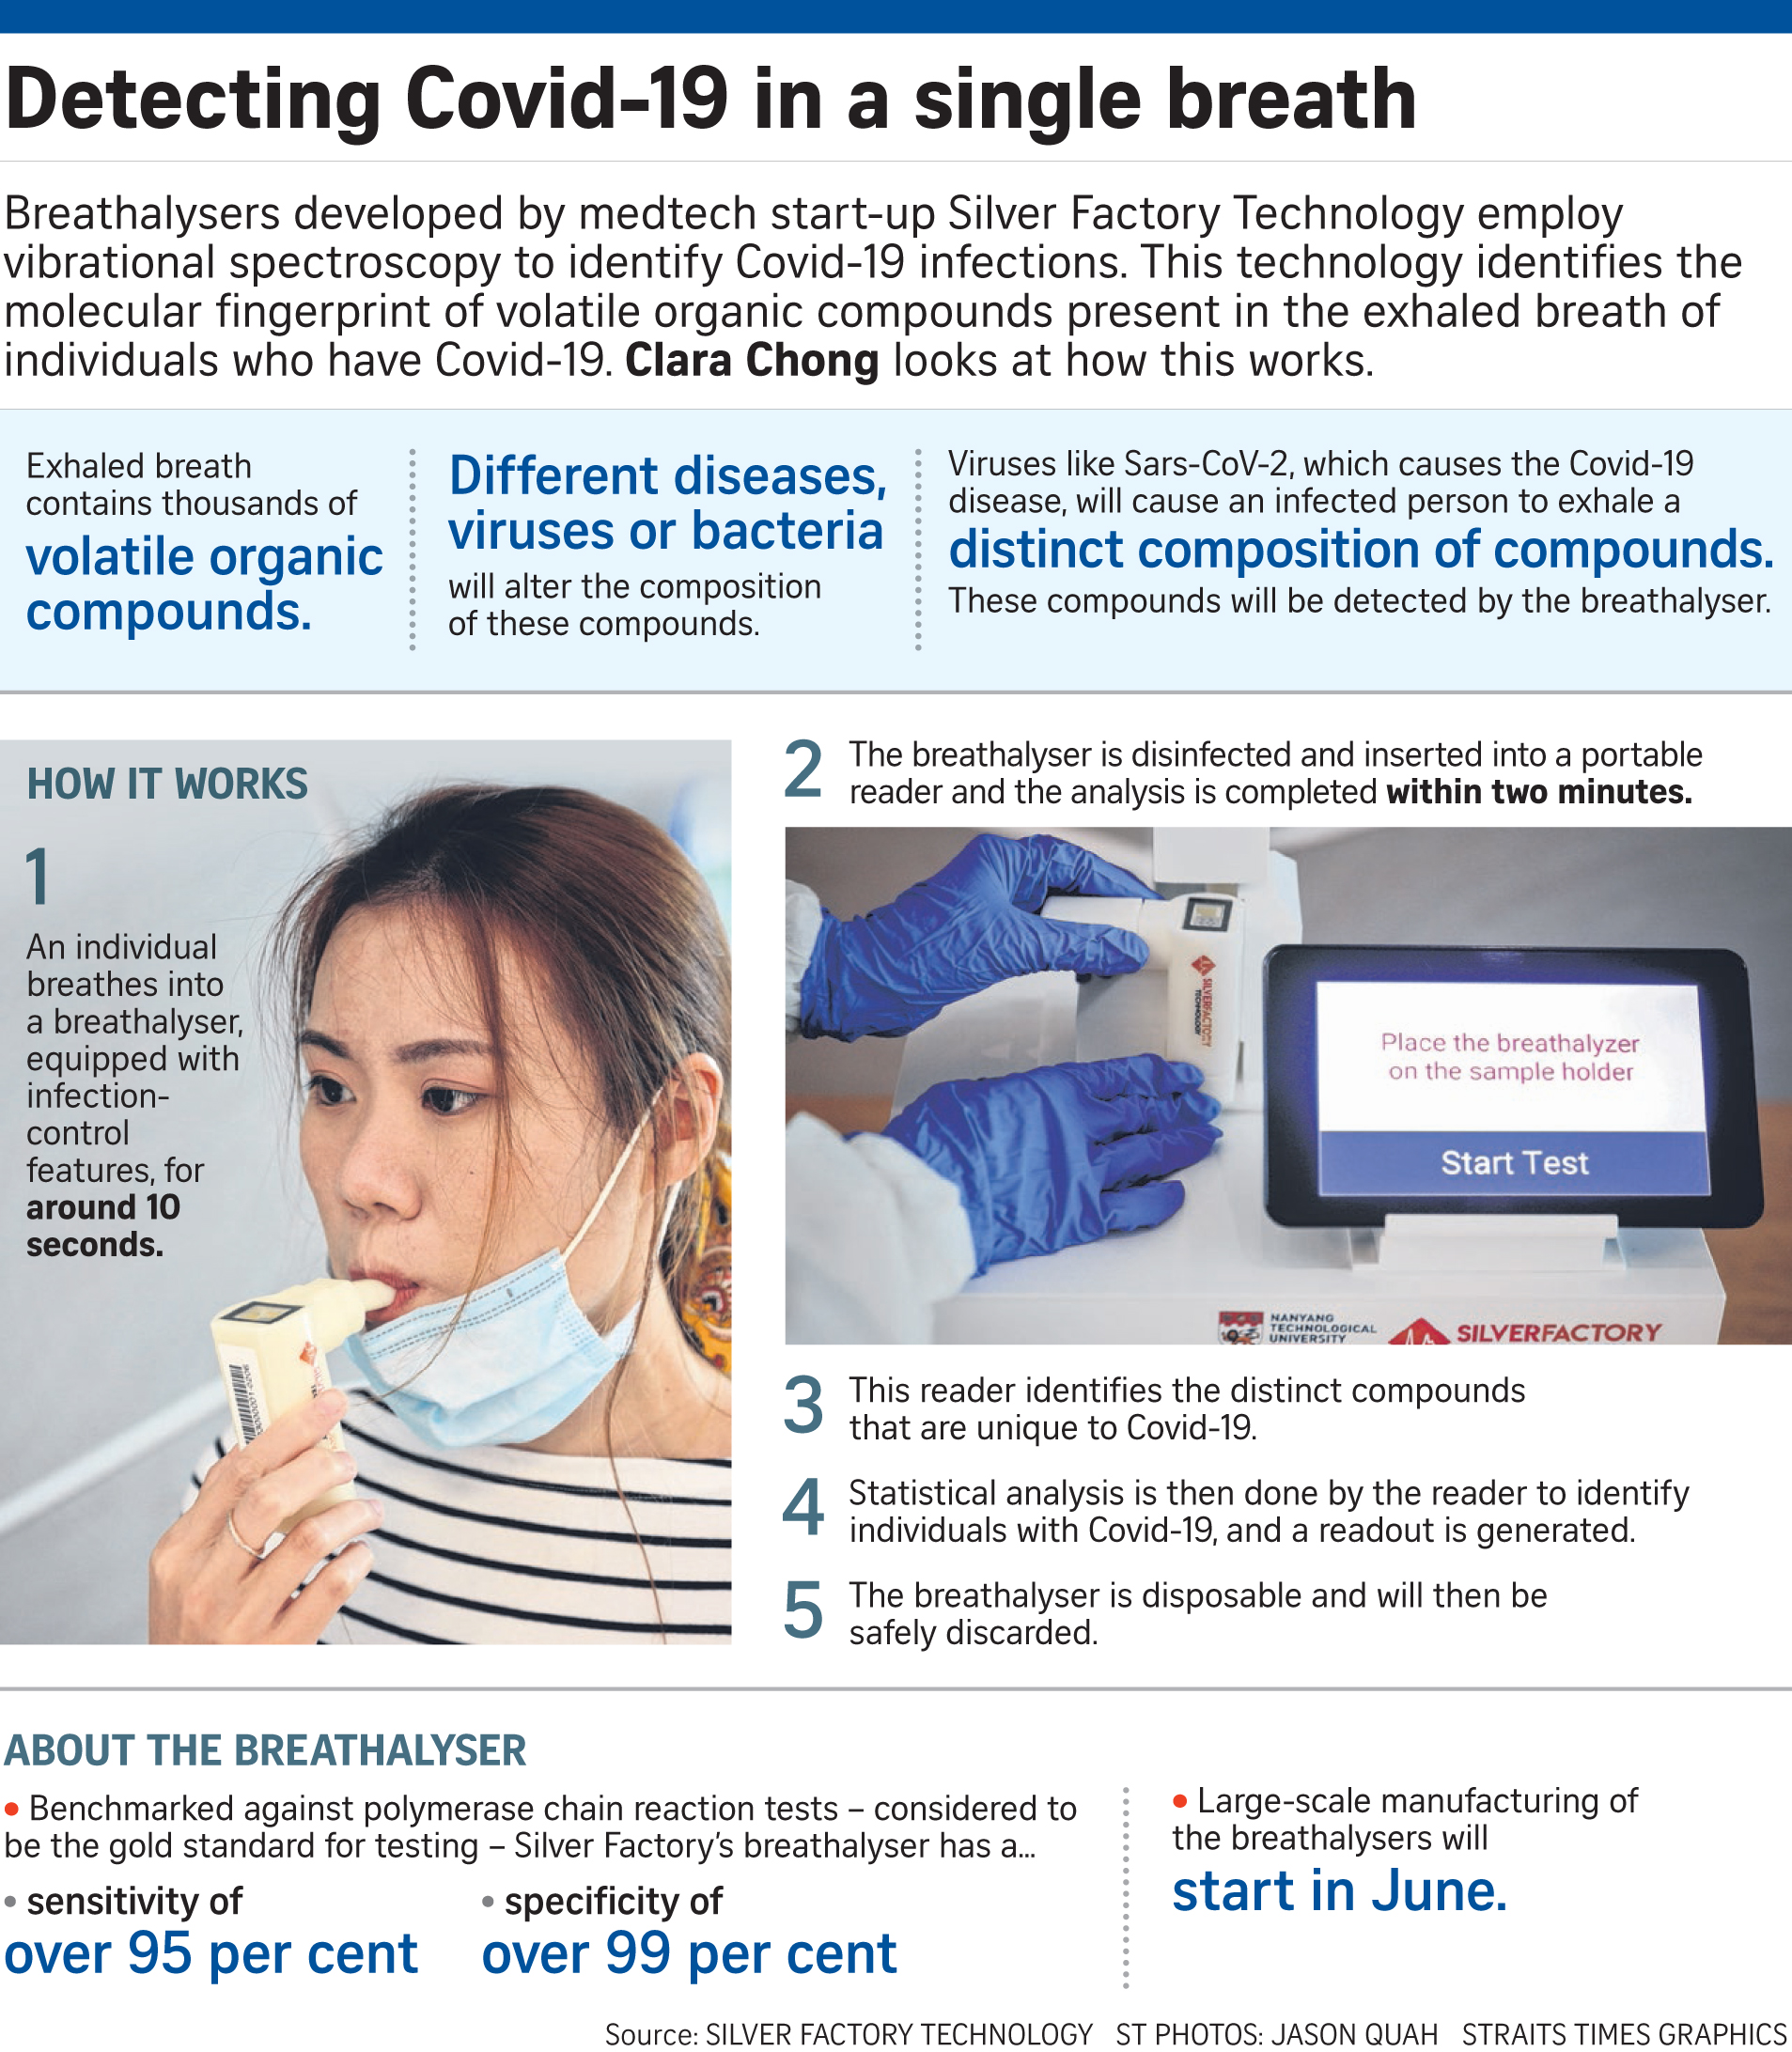 Are Breathalyzer Devices Safe During COVID-19 Pandemic?